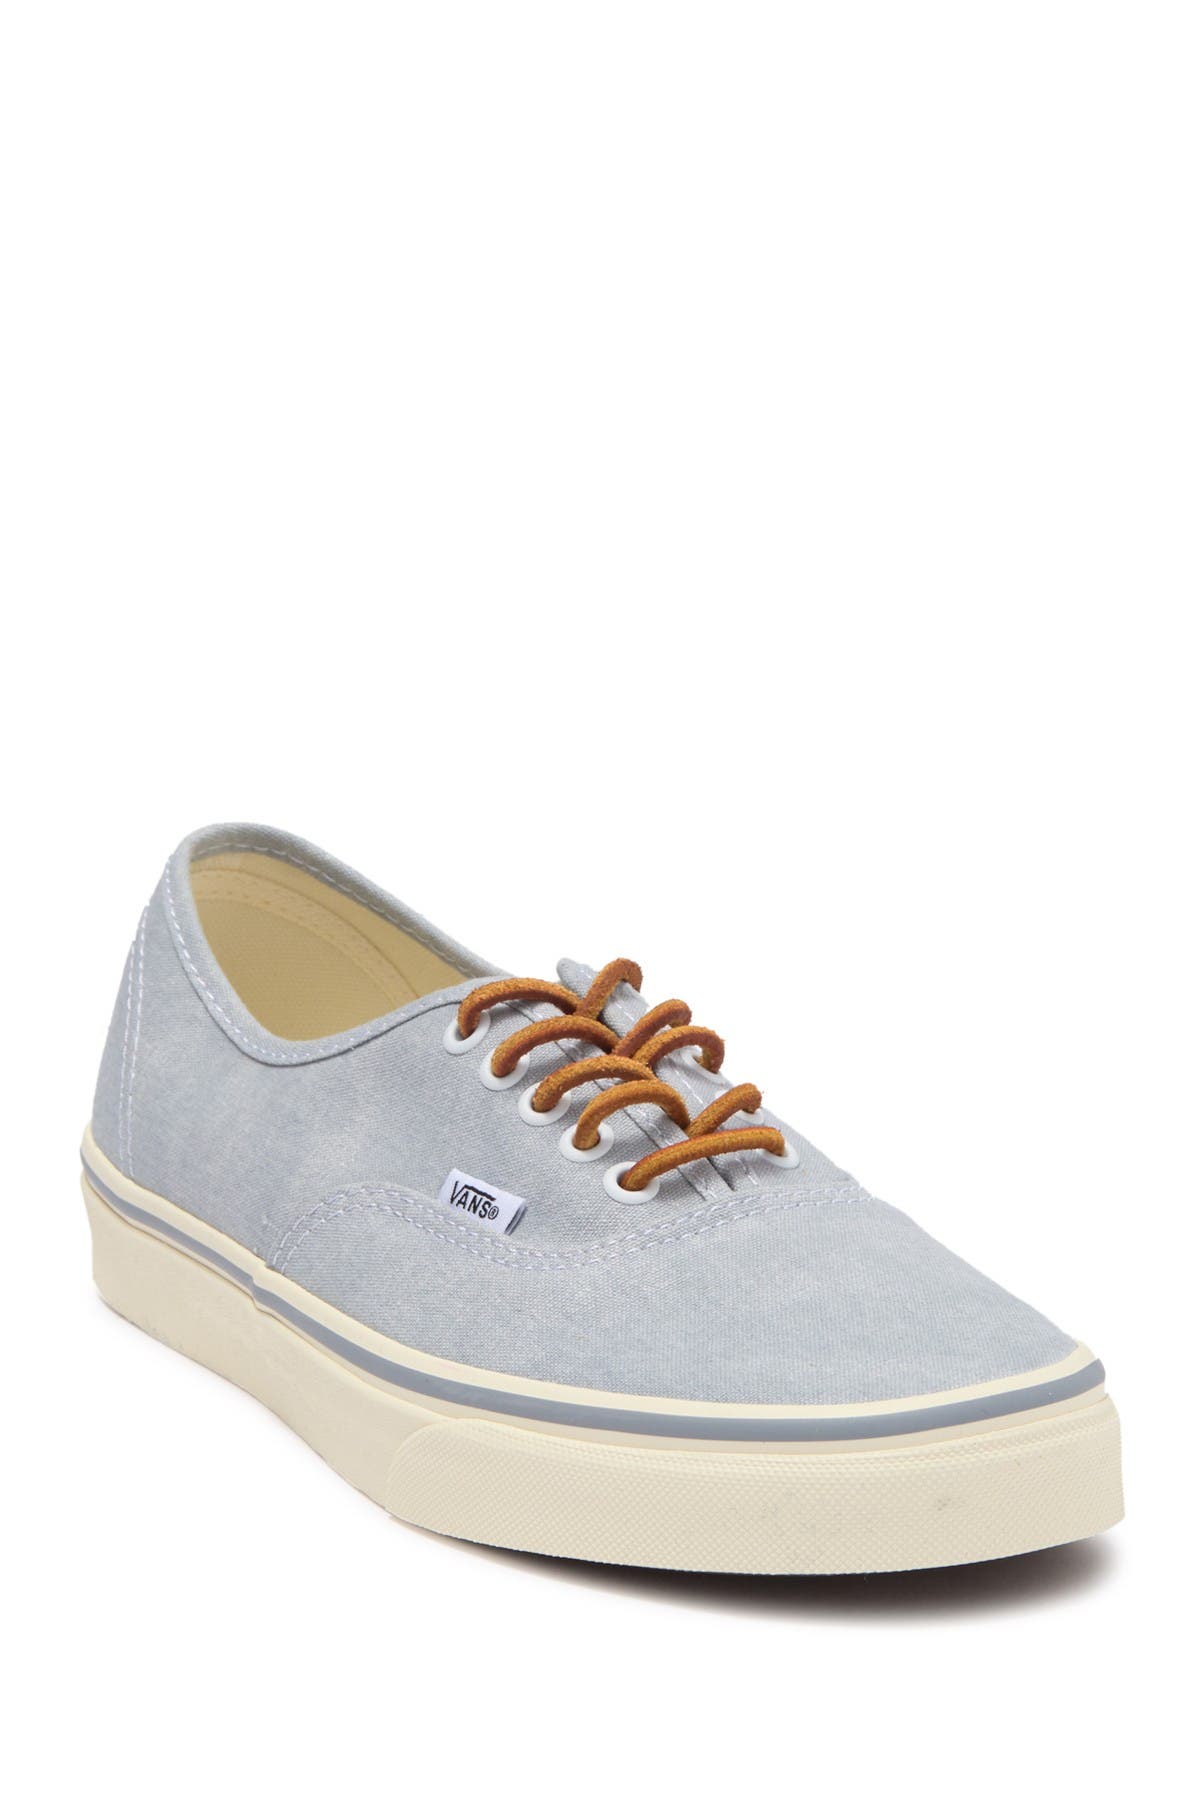 vans authentic washed